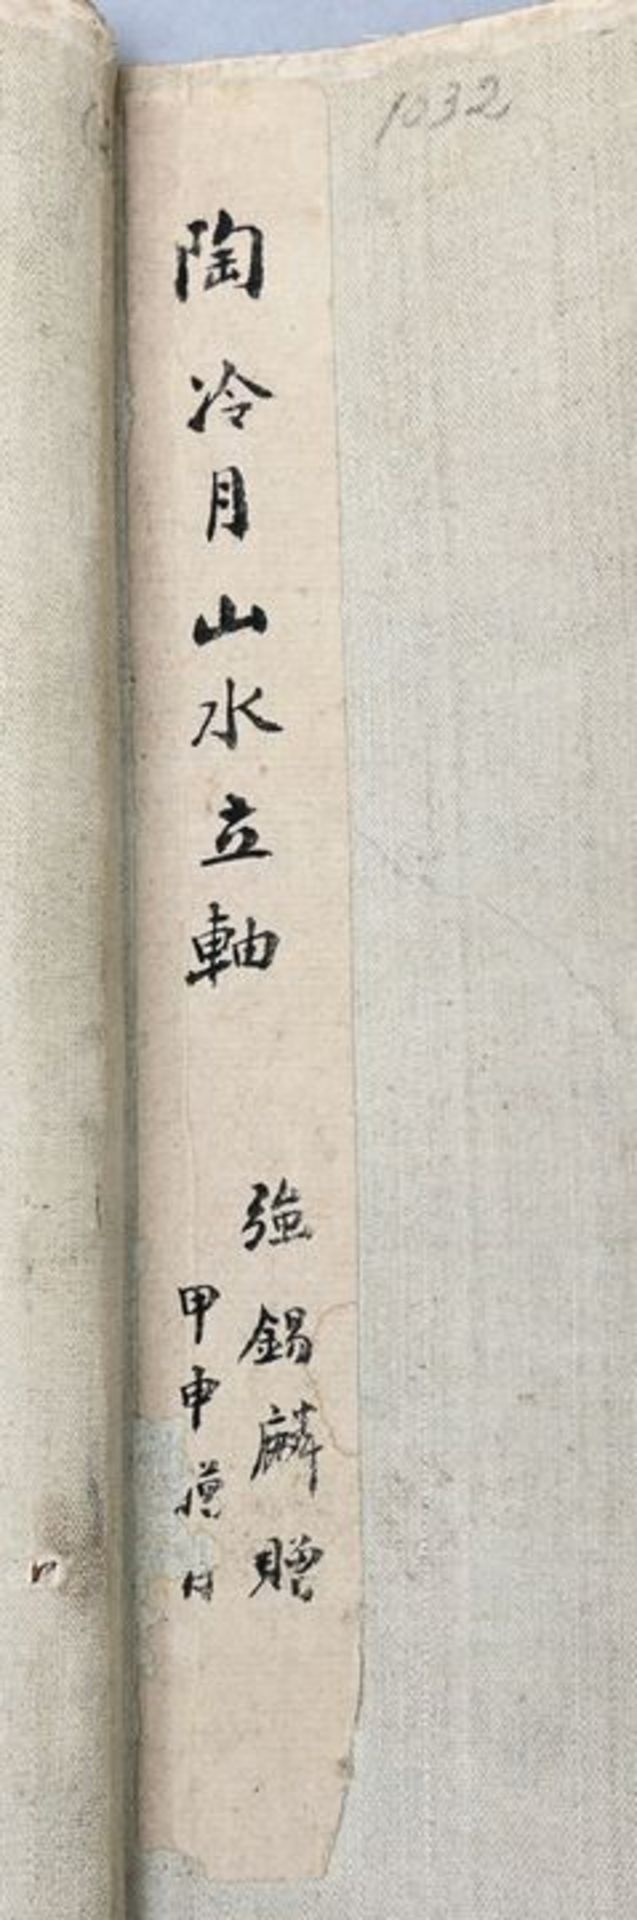 Hängerolle/ hanging scroll - Image 3 of 5